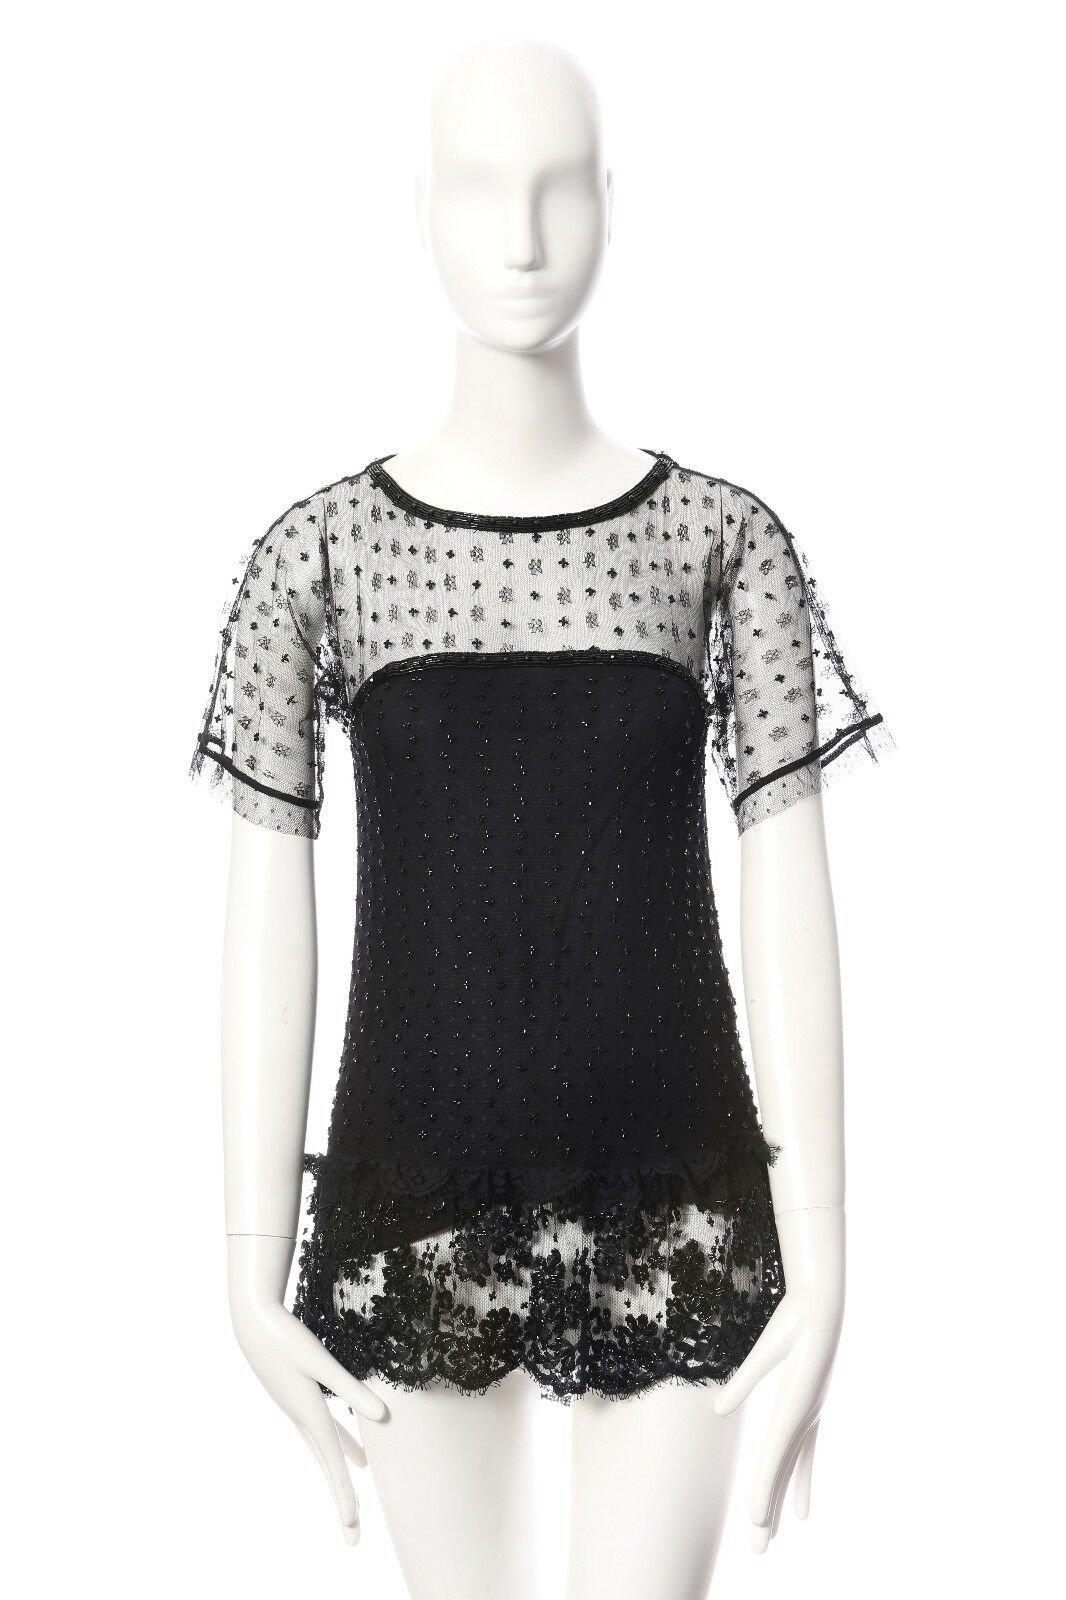 VALENTINO black mesh lace bead embellished t-shirt couture top IT40 US4 UK8 S 
Reference: CAWG/A00099 
Brand: Valentino 
Material: Viscose 
Color: Black 
Pattern: Other 
Extra Detail: Viscose, polyamide, nylon. Sheer mesh lace outer. Beaded rounded